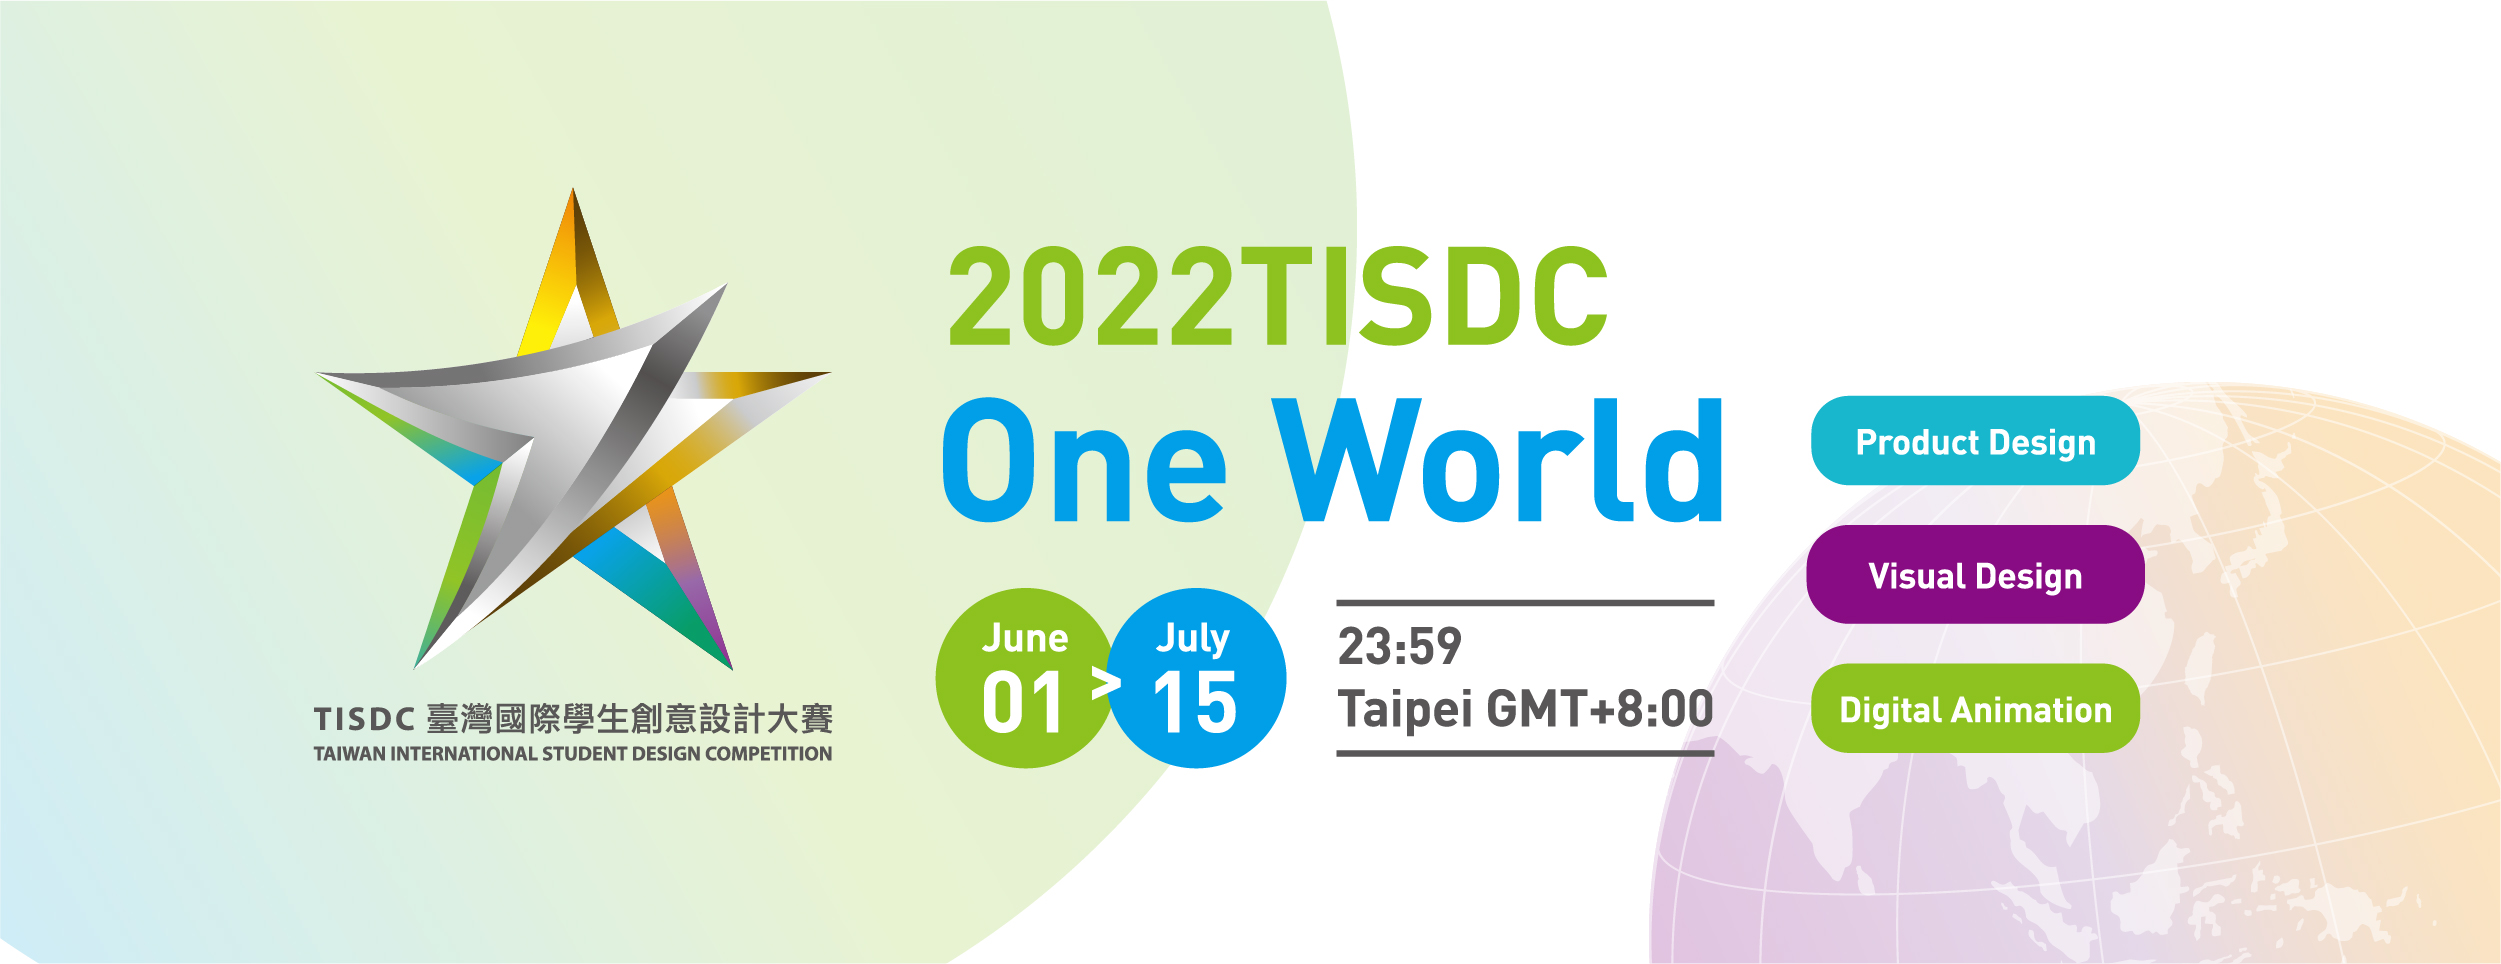 2022 TISDC is going to call for entries from June 1st to July 15th, 2022.